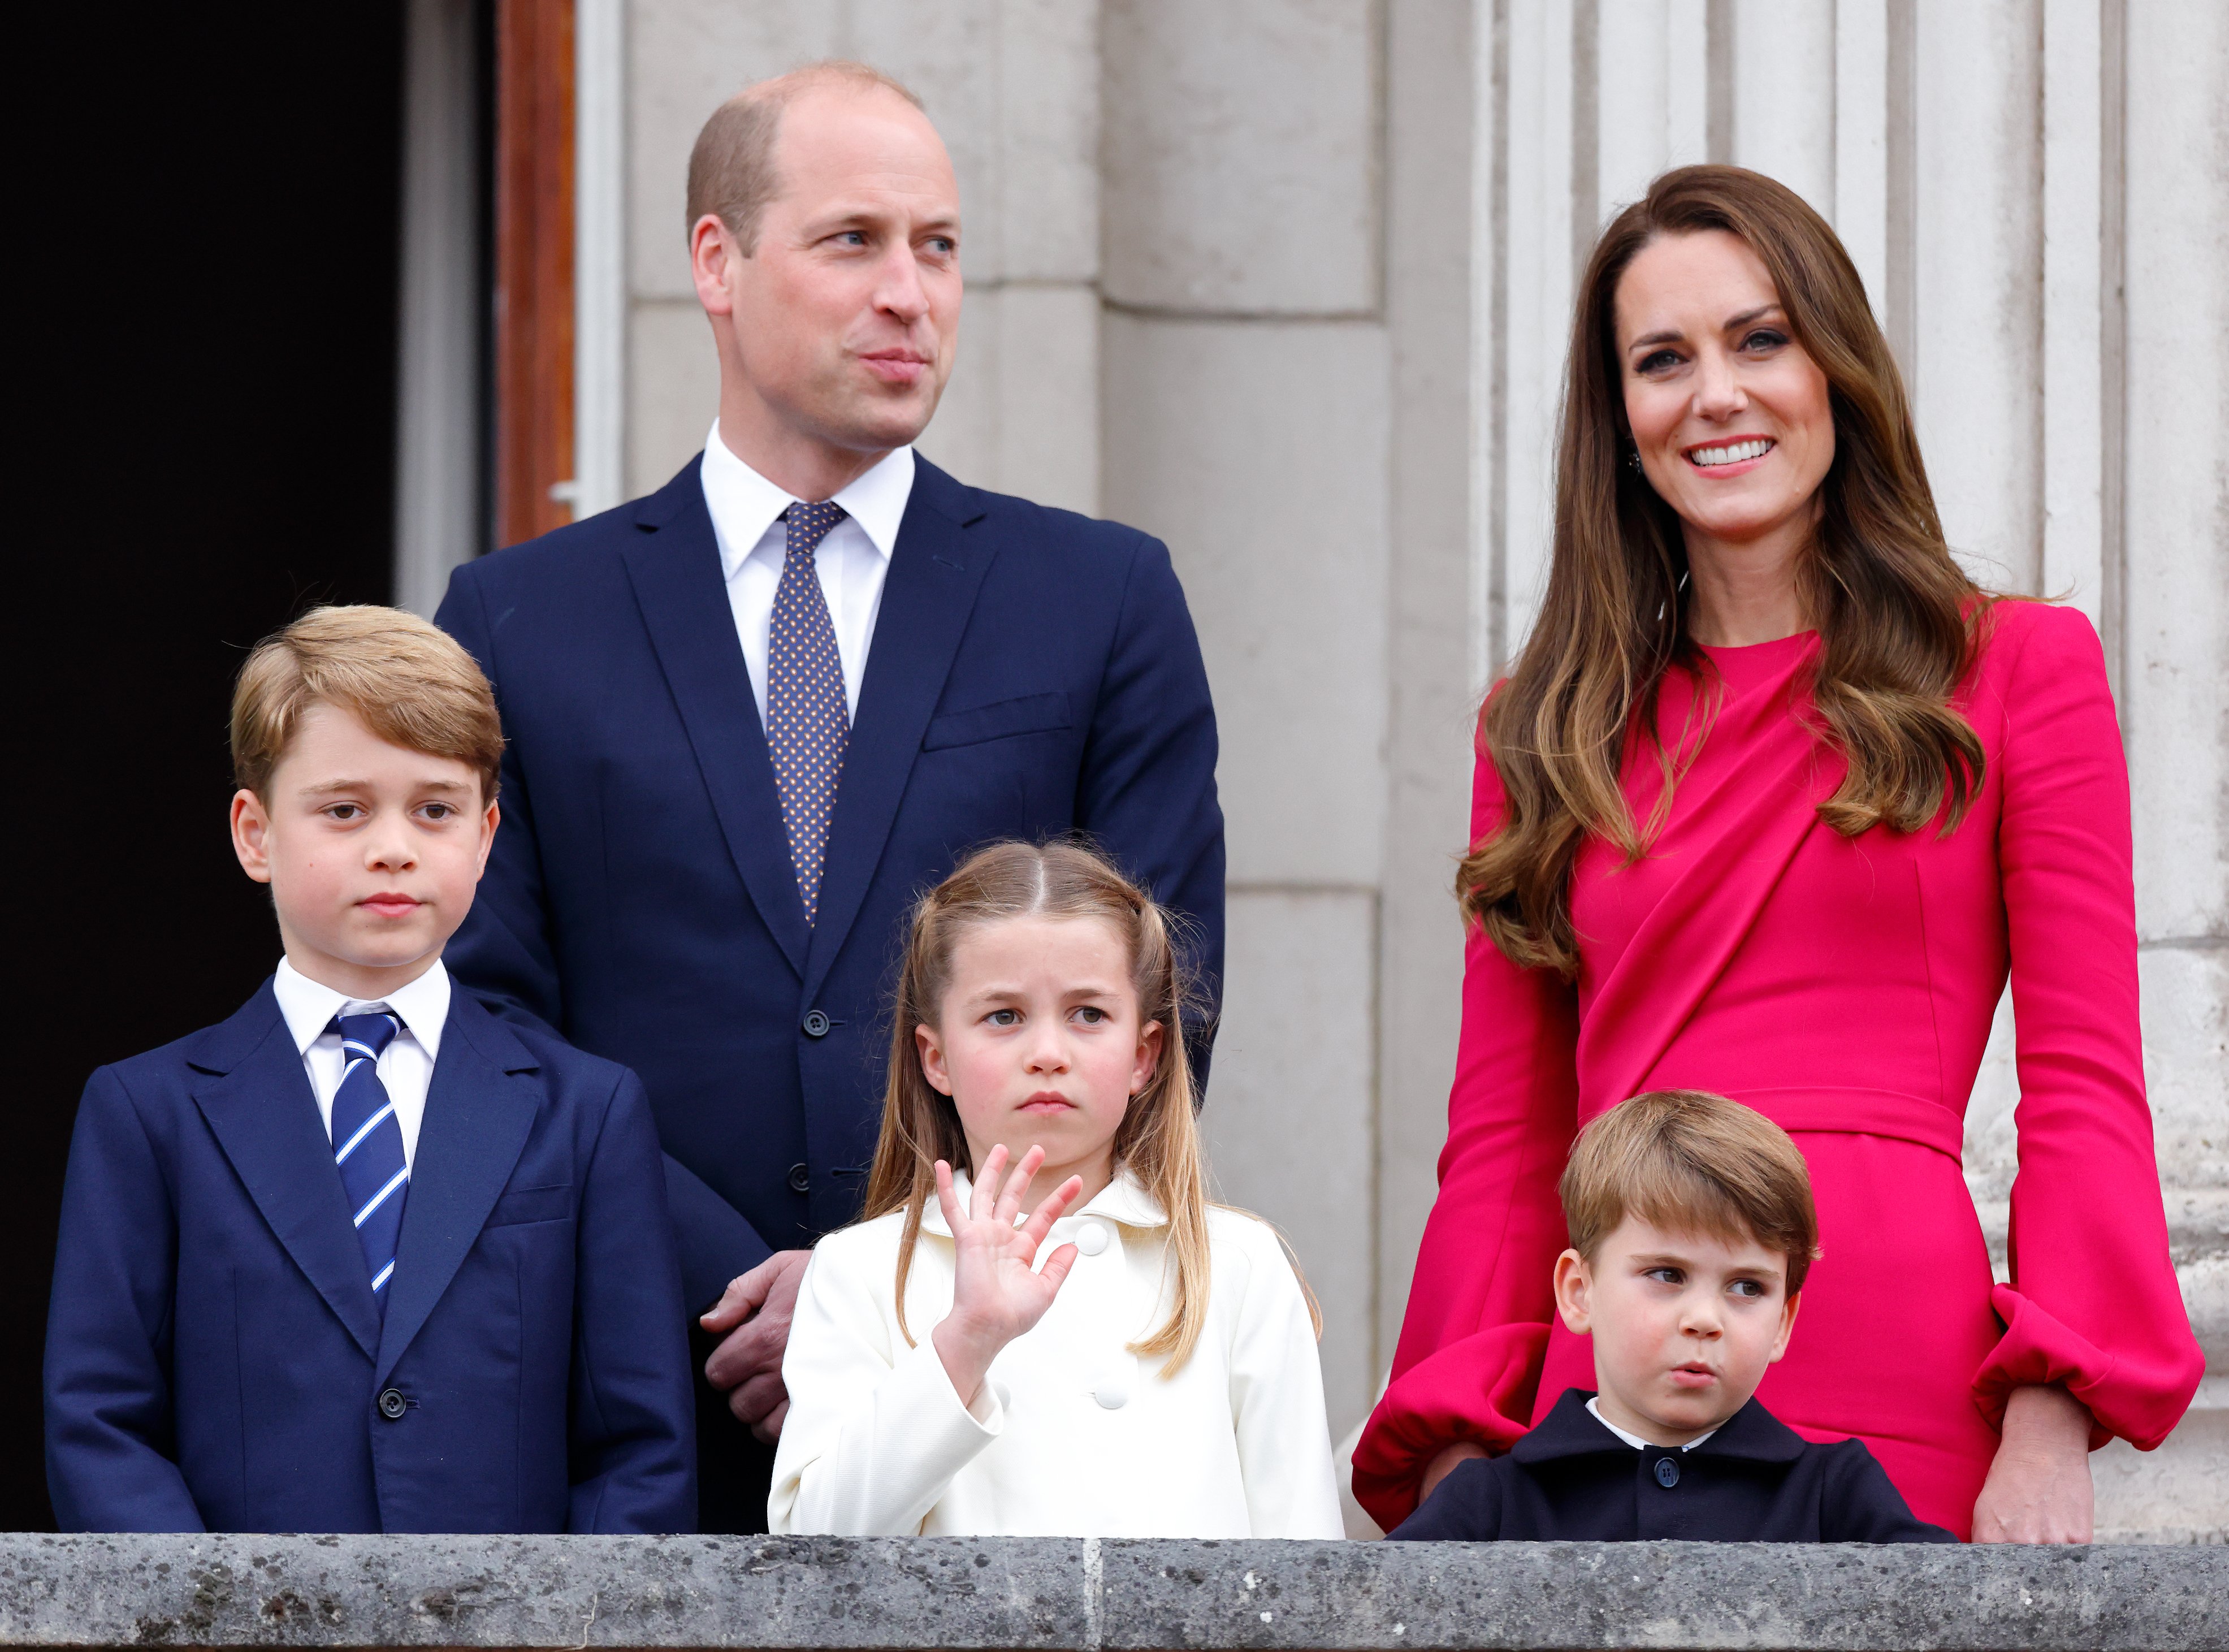 The Prince and Princess of Wales and their children stand on the balcony of Buckingham Palace following the Platinum Pageant on June 5, 2022, in London, England. | Source: Getty Images